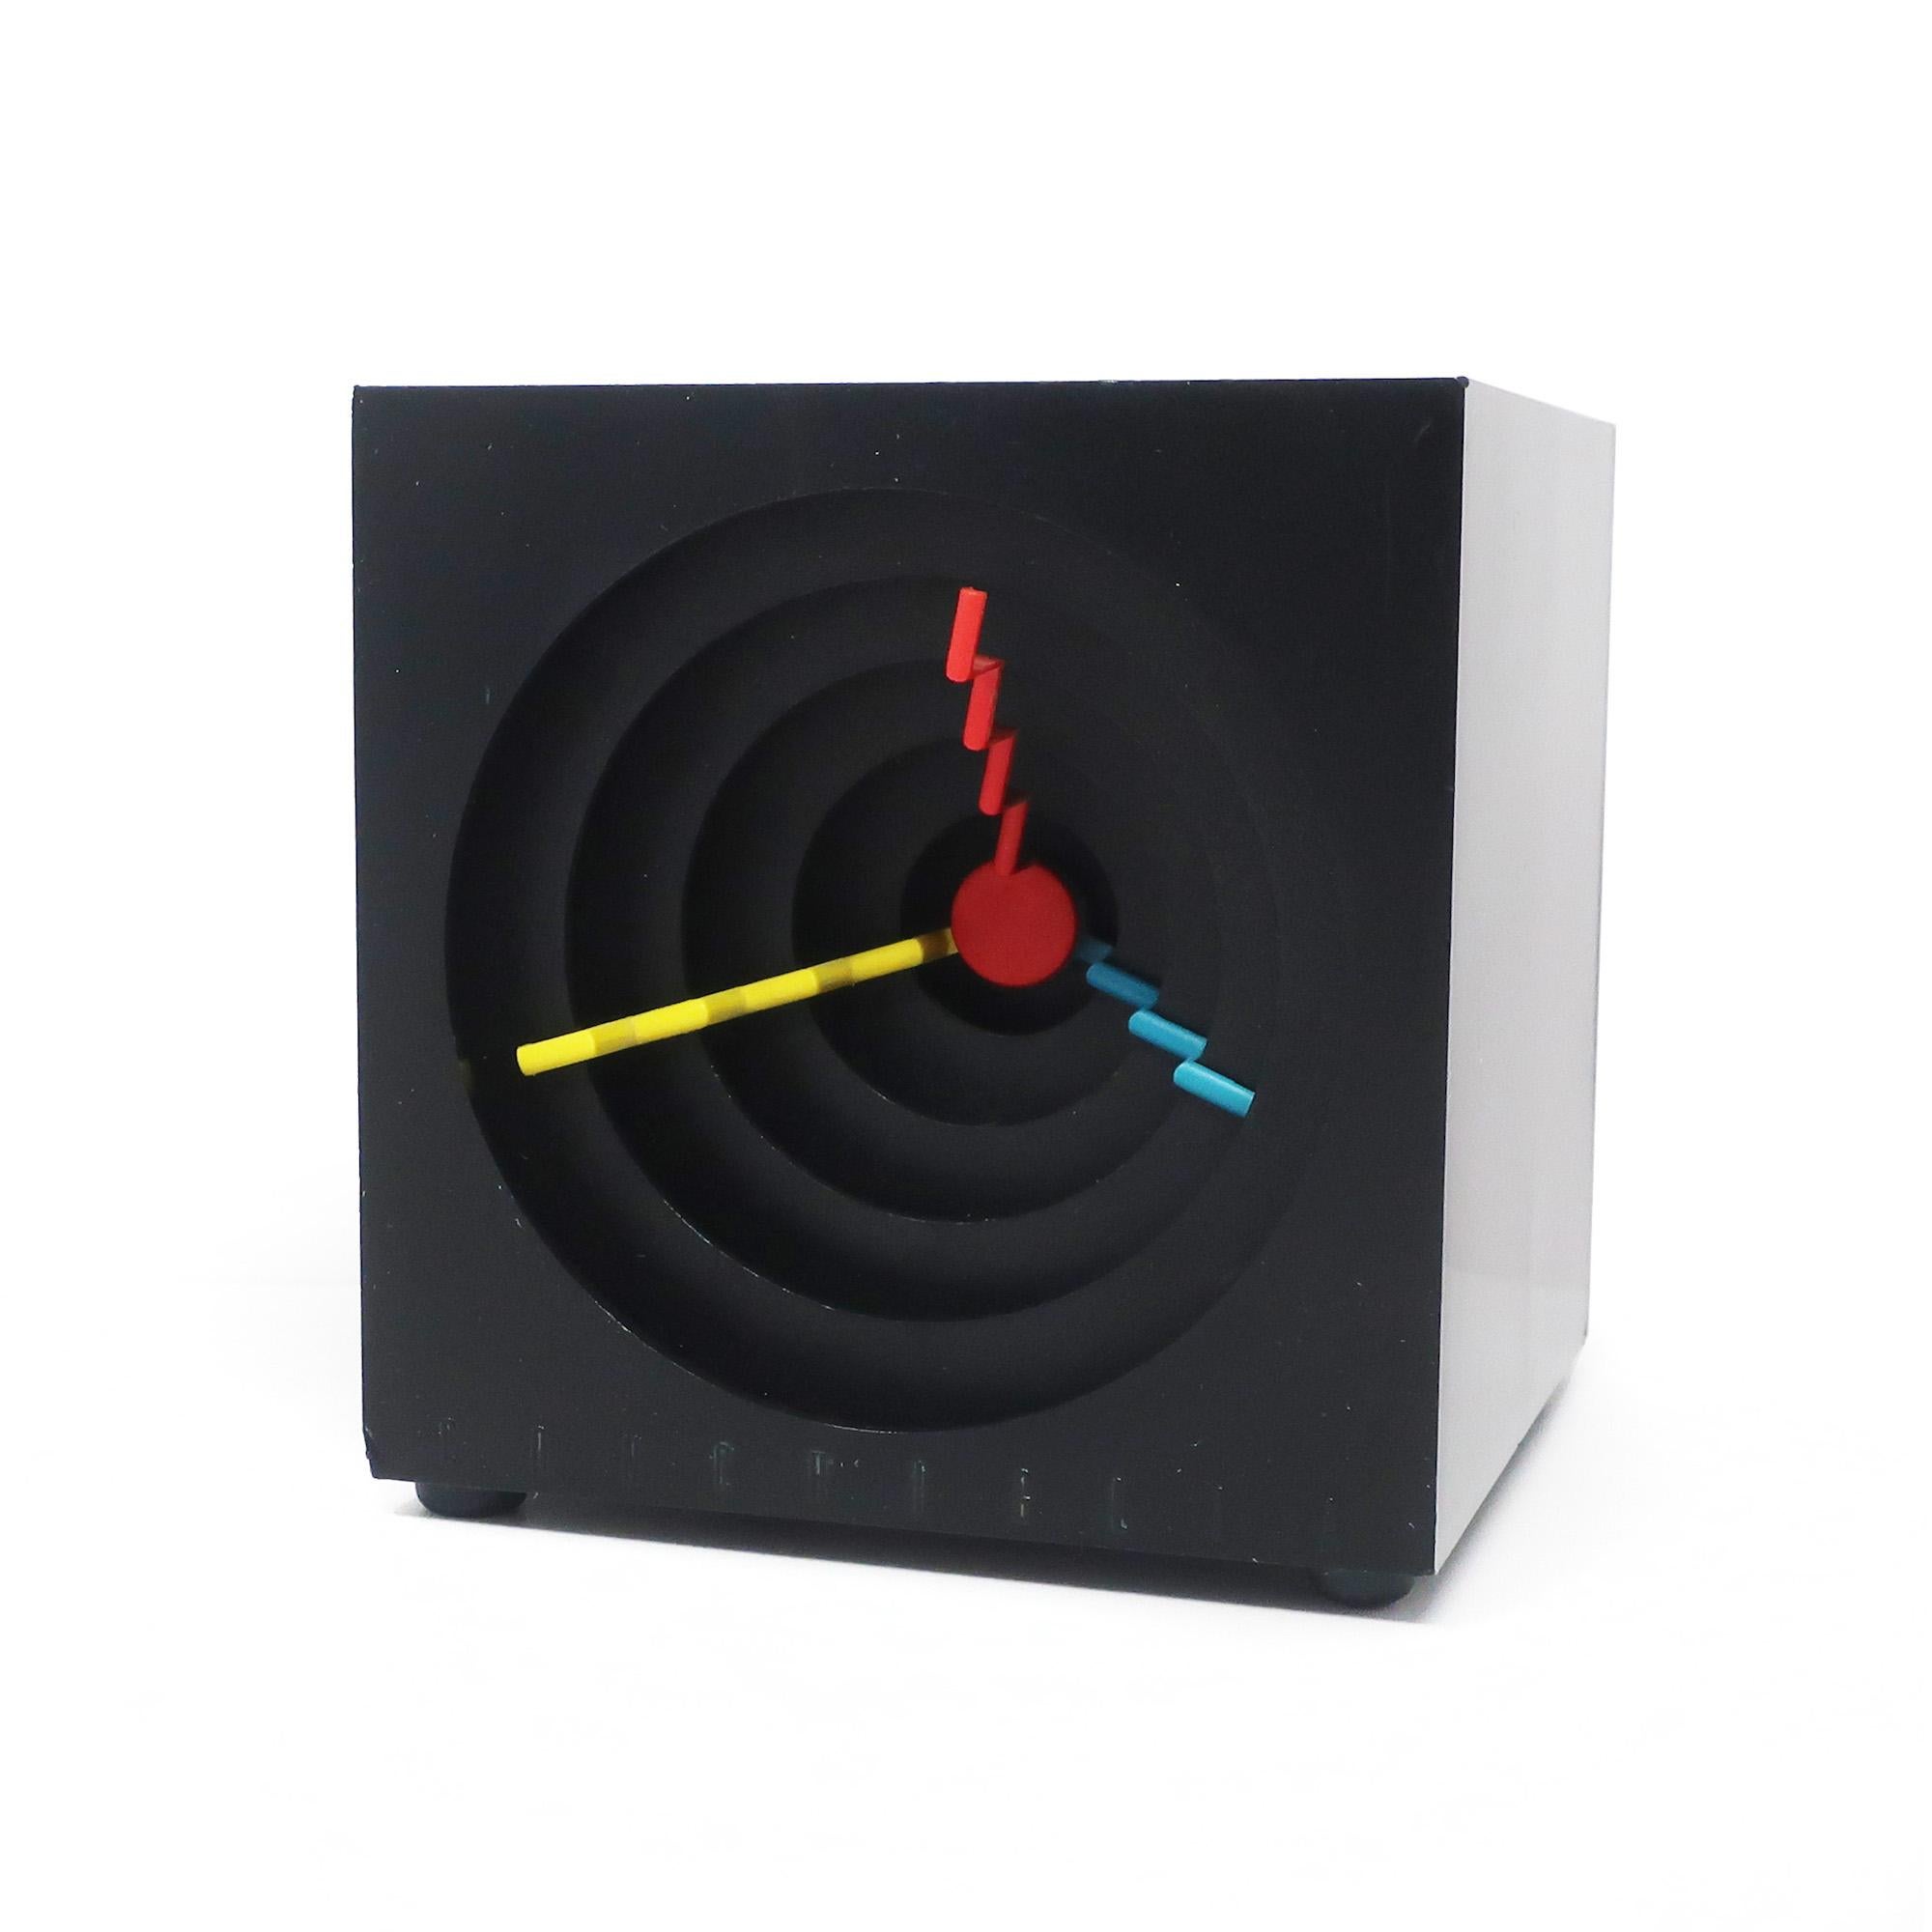  A stunning Italian postmodern black Conchiglia desk clock from 1988 by Winning Ideas.  Made in Italy, the clock's name (